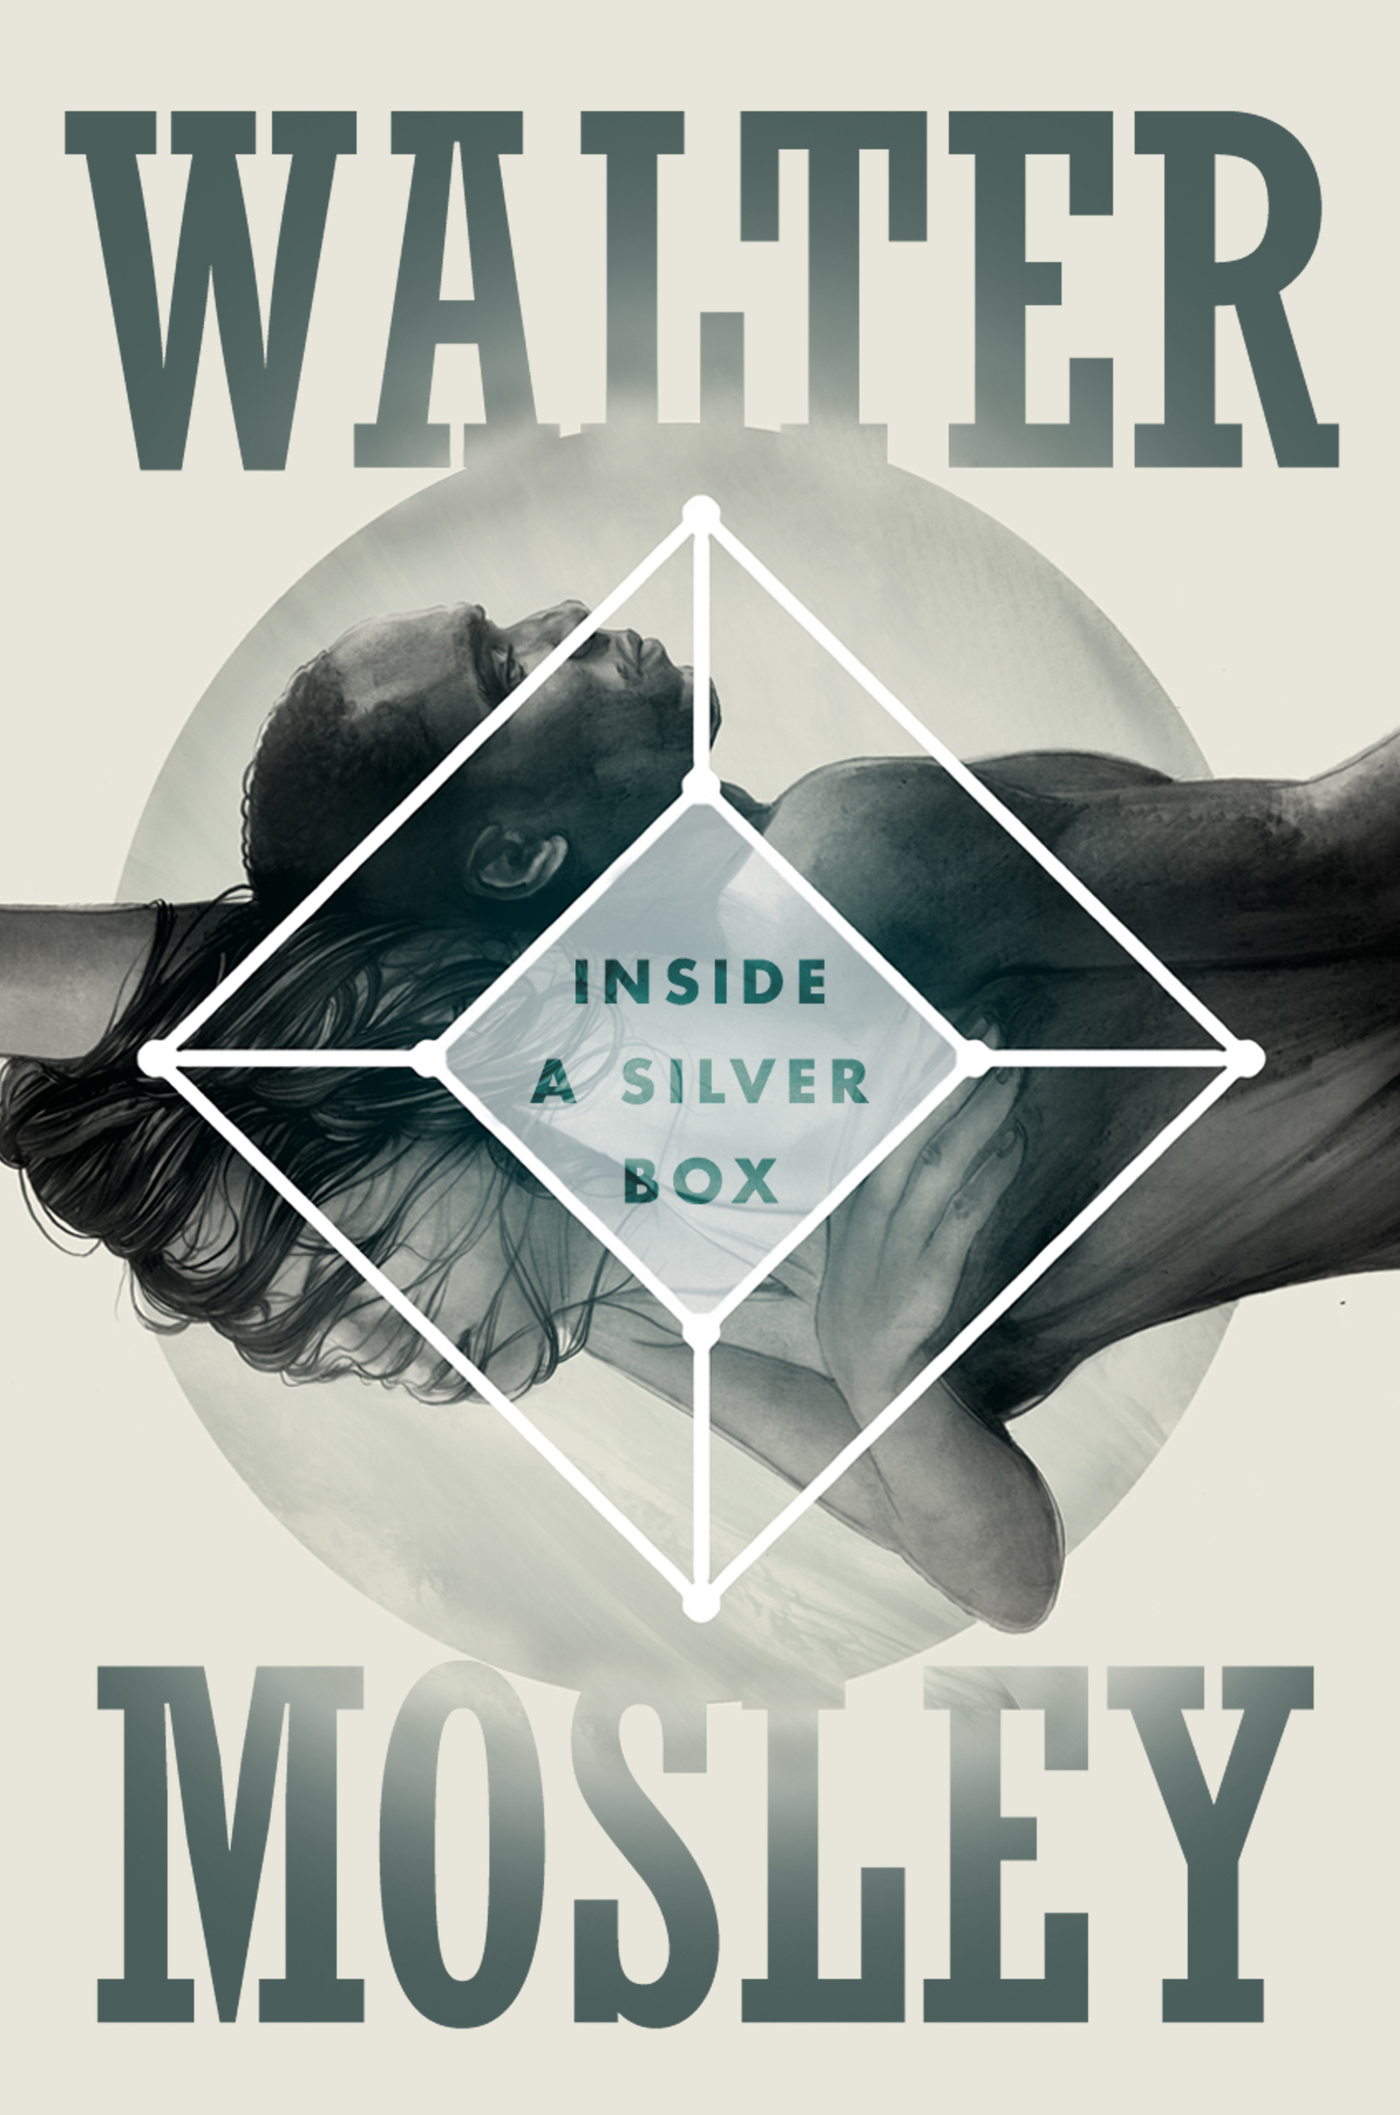 Inside a Silver Box : A Novel by Walter Mosley